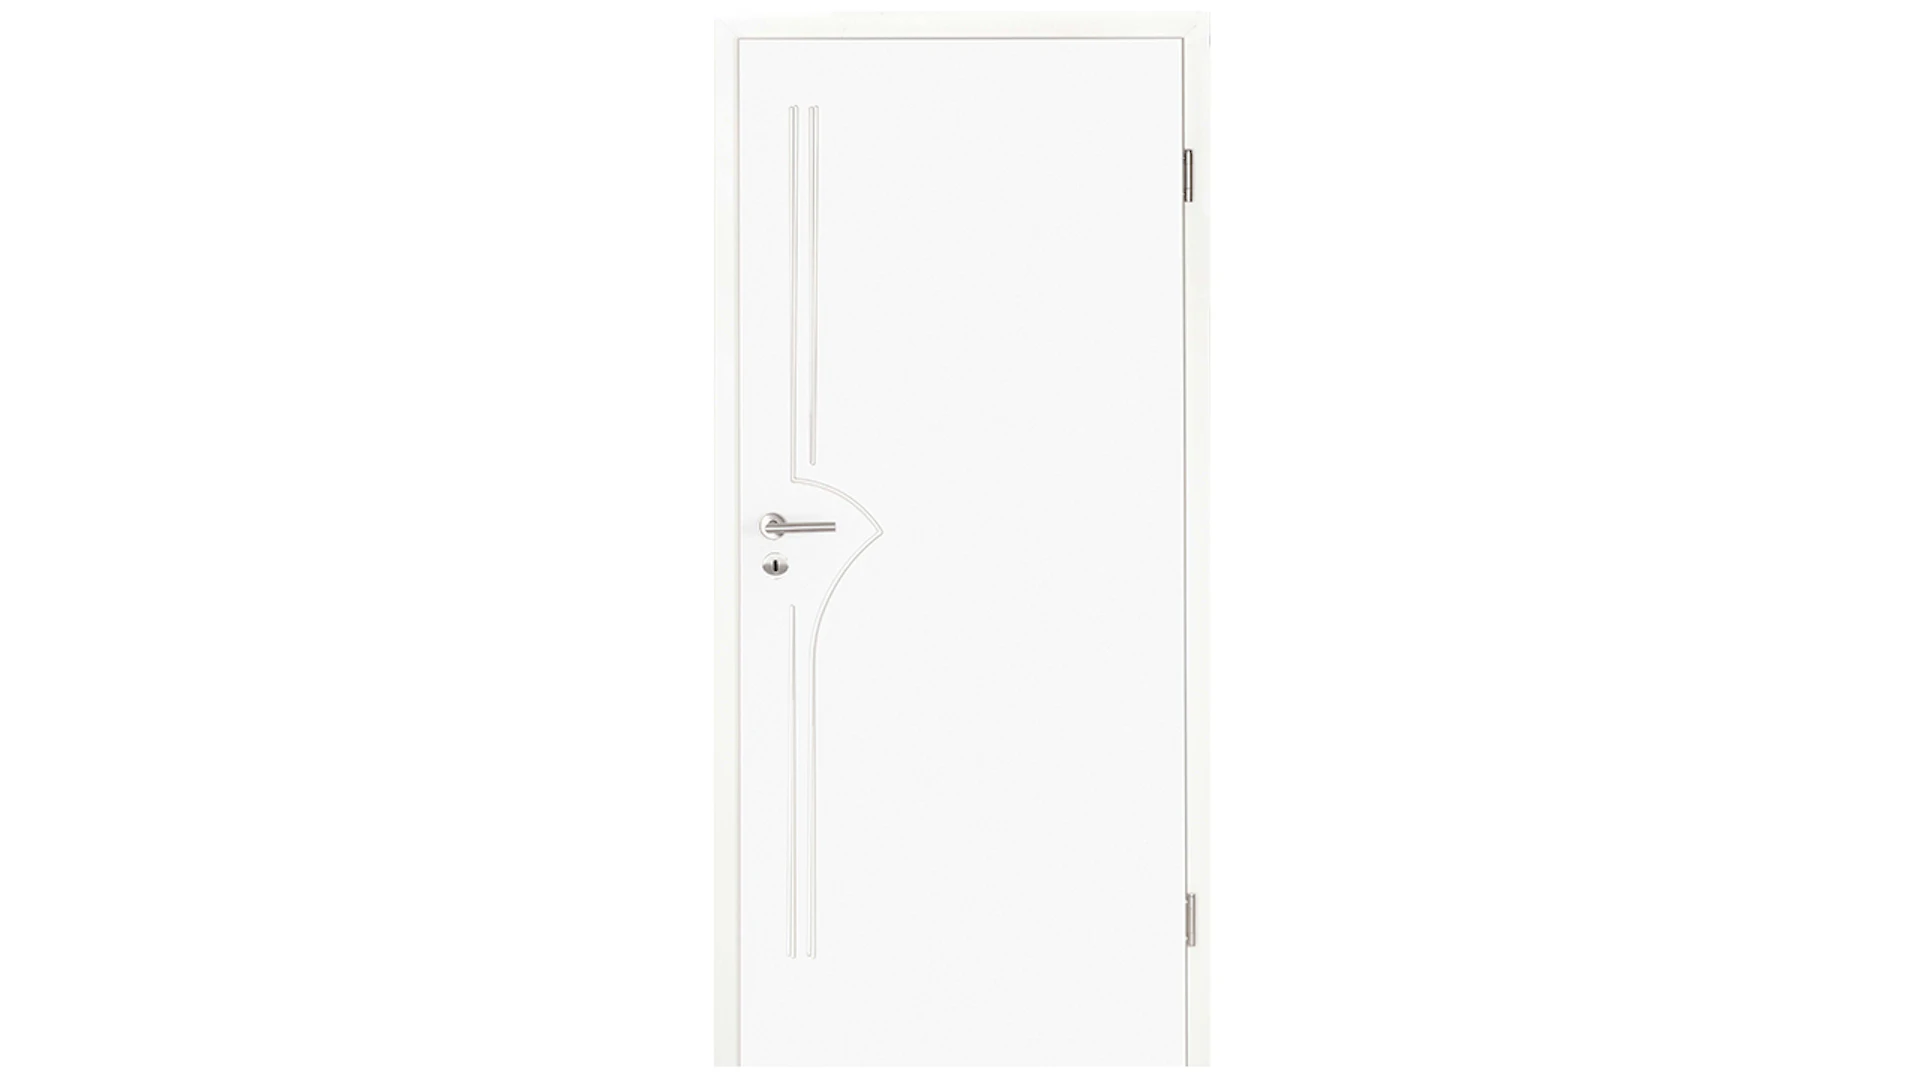 planeo interior door lacquer 2.0 - Kalle 9010 white lacquer 2110 x 735 mm DIN R - round RSP hinge 3-t